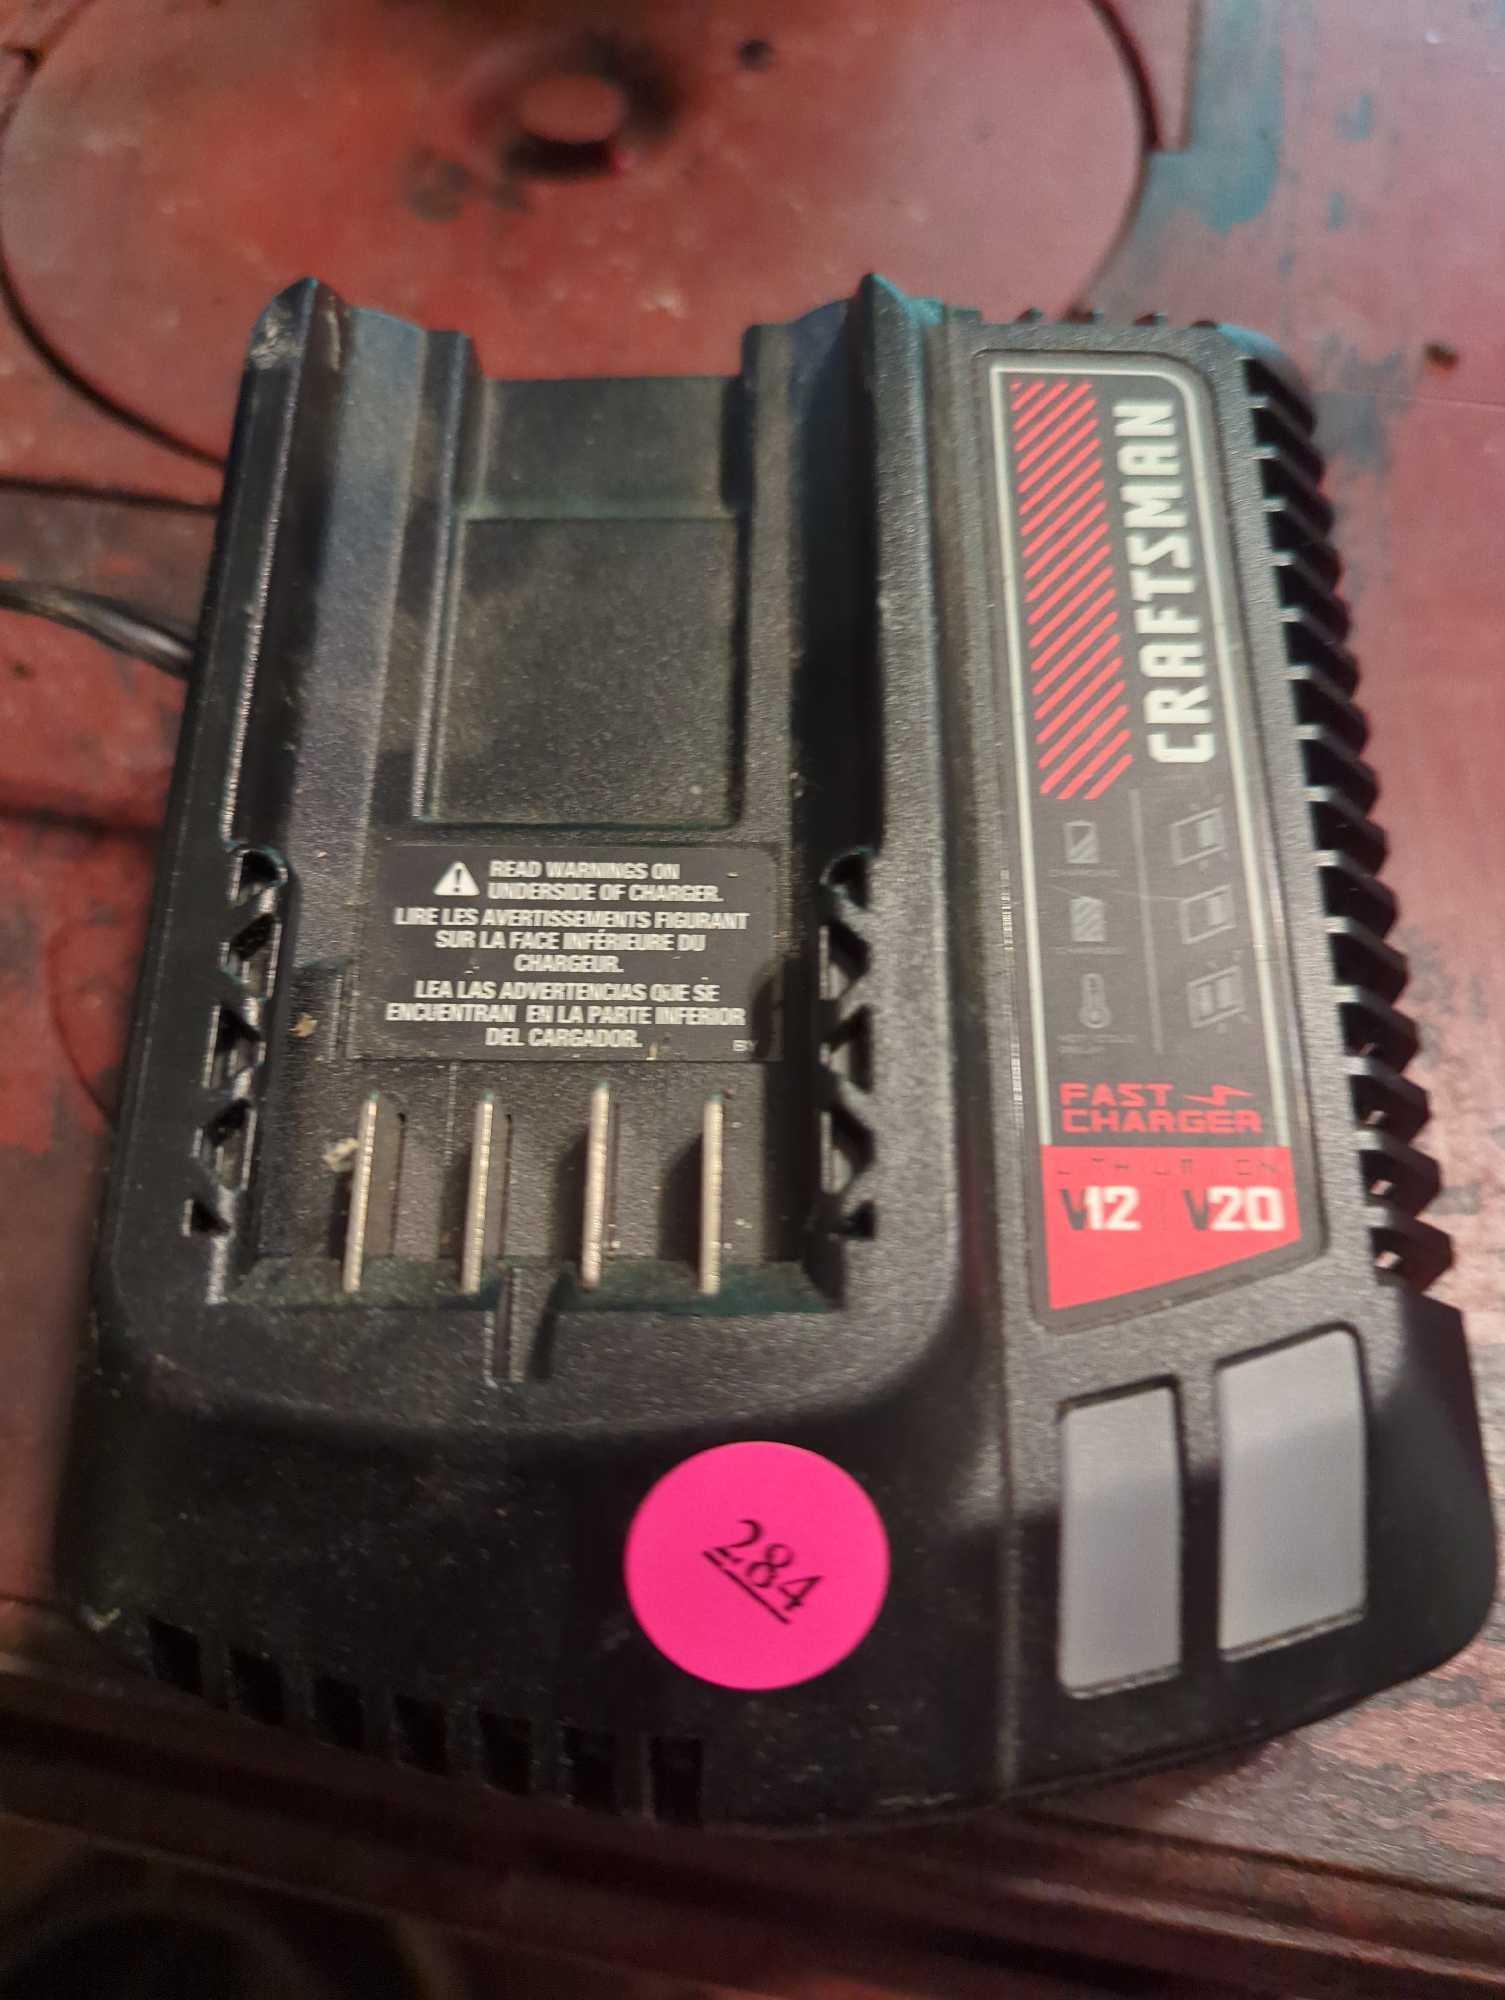 (KIT) CRAFTSMAN CMCB102 TYPE 1 -12V 20V MAX LITHIUM-ION BATTERY CHARGER, IS IN GREAT CONDITION, WHAT